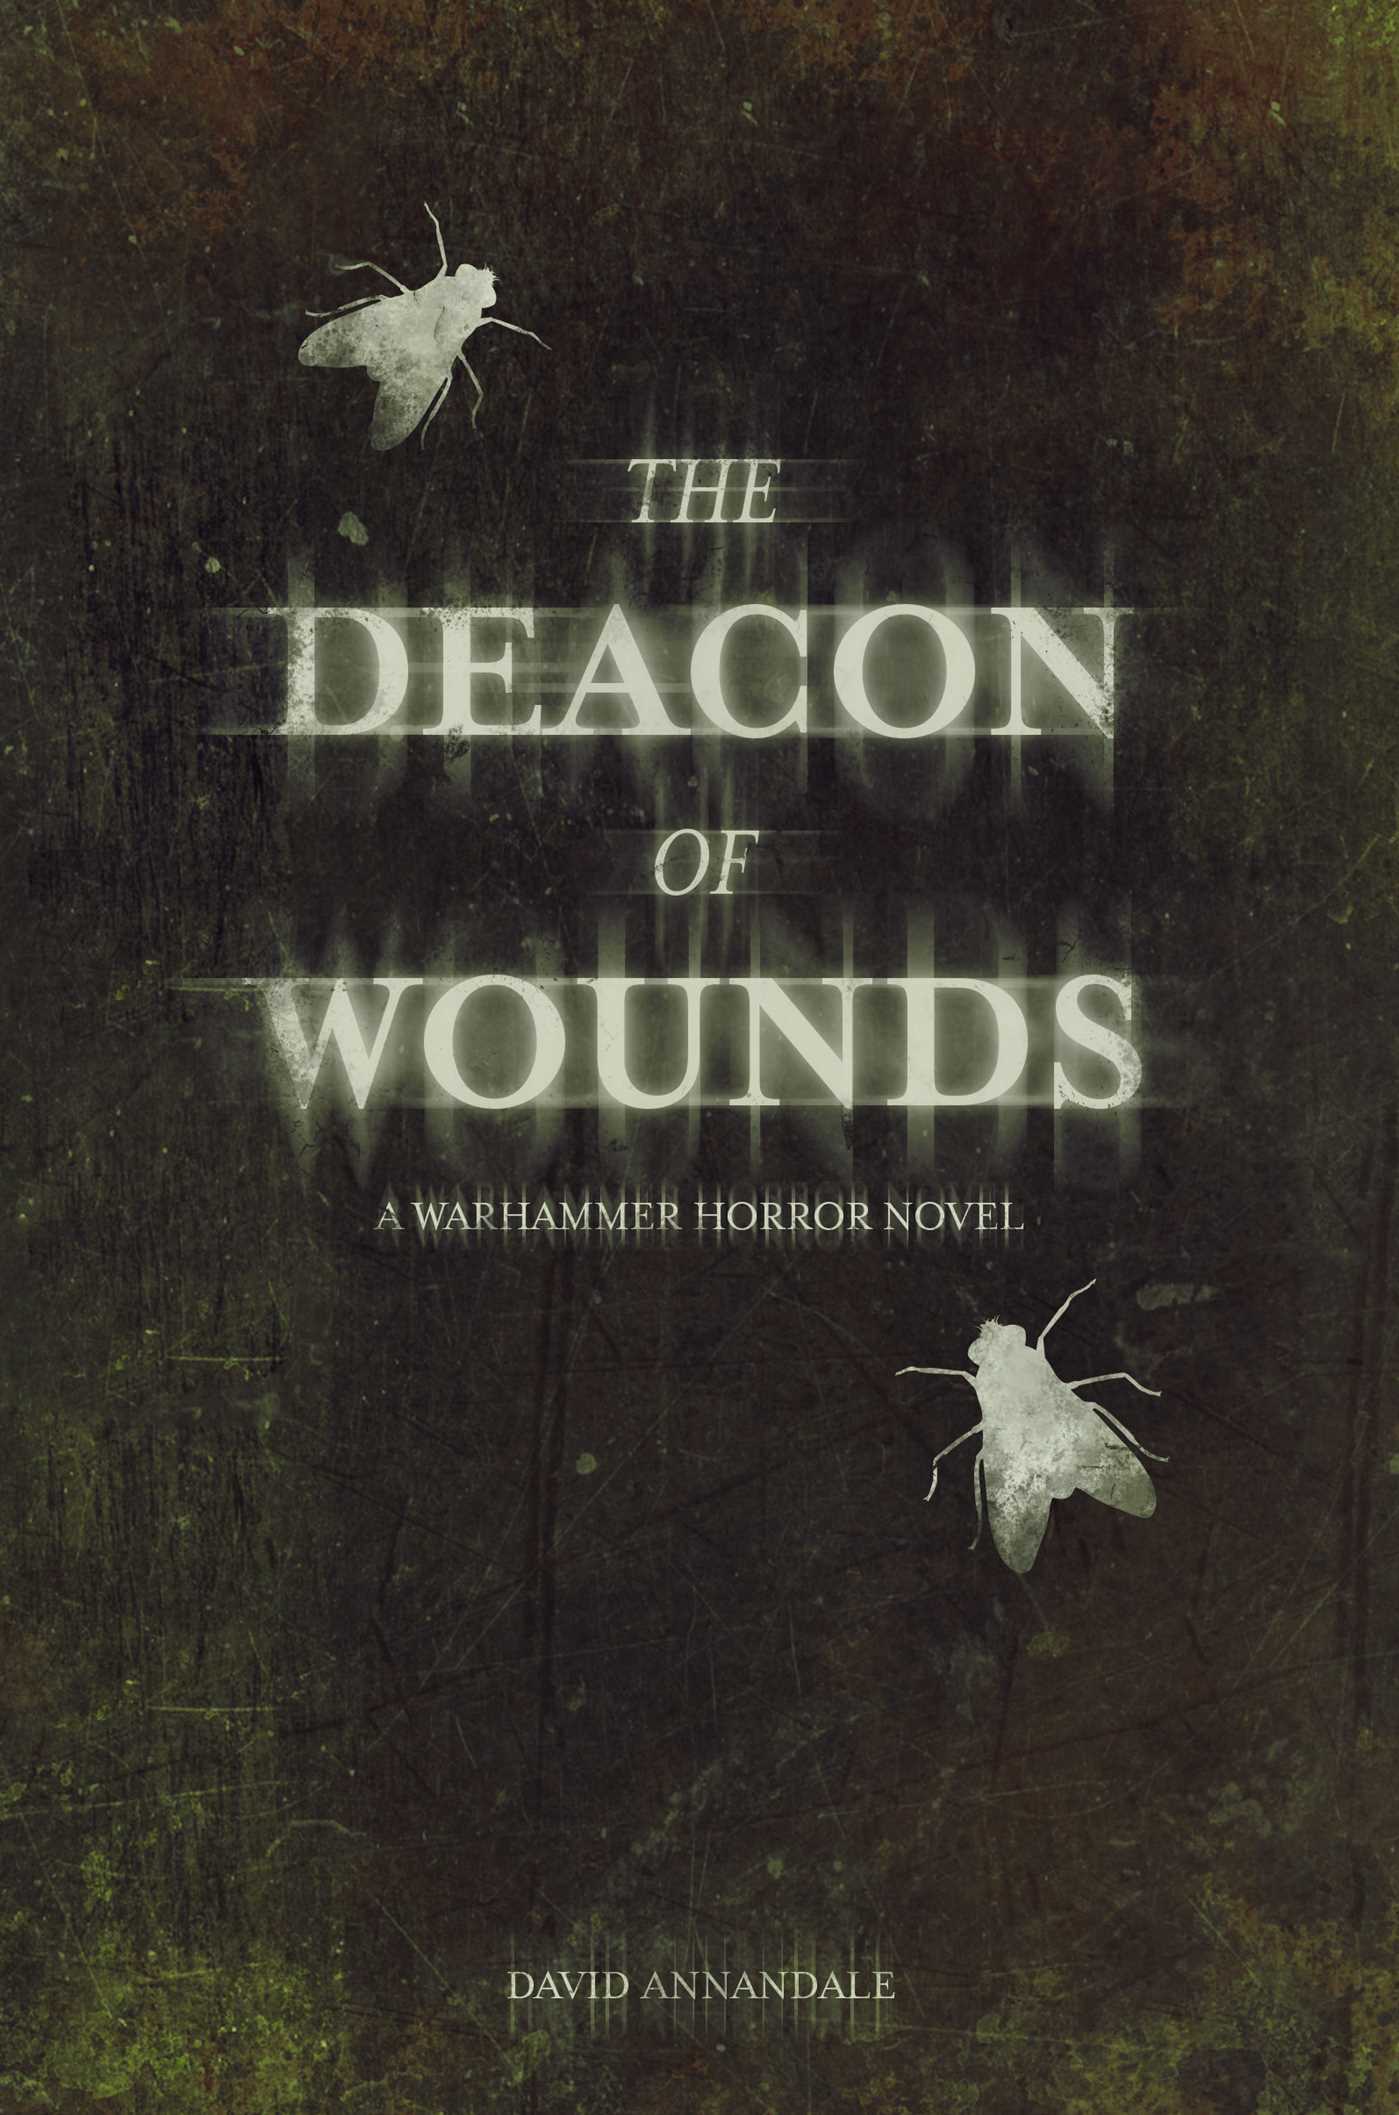 The Deacon of Wounds by David Annandale